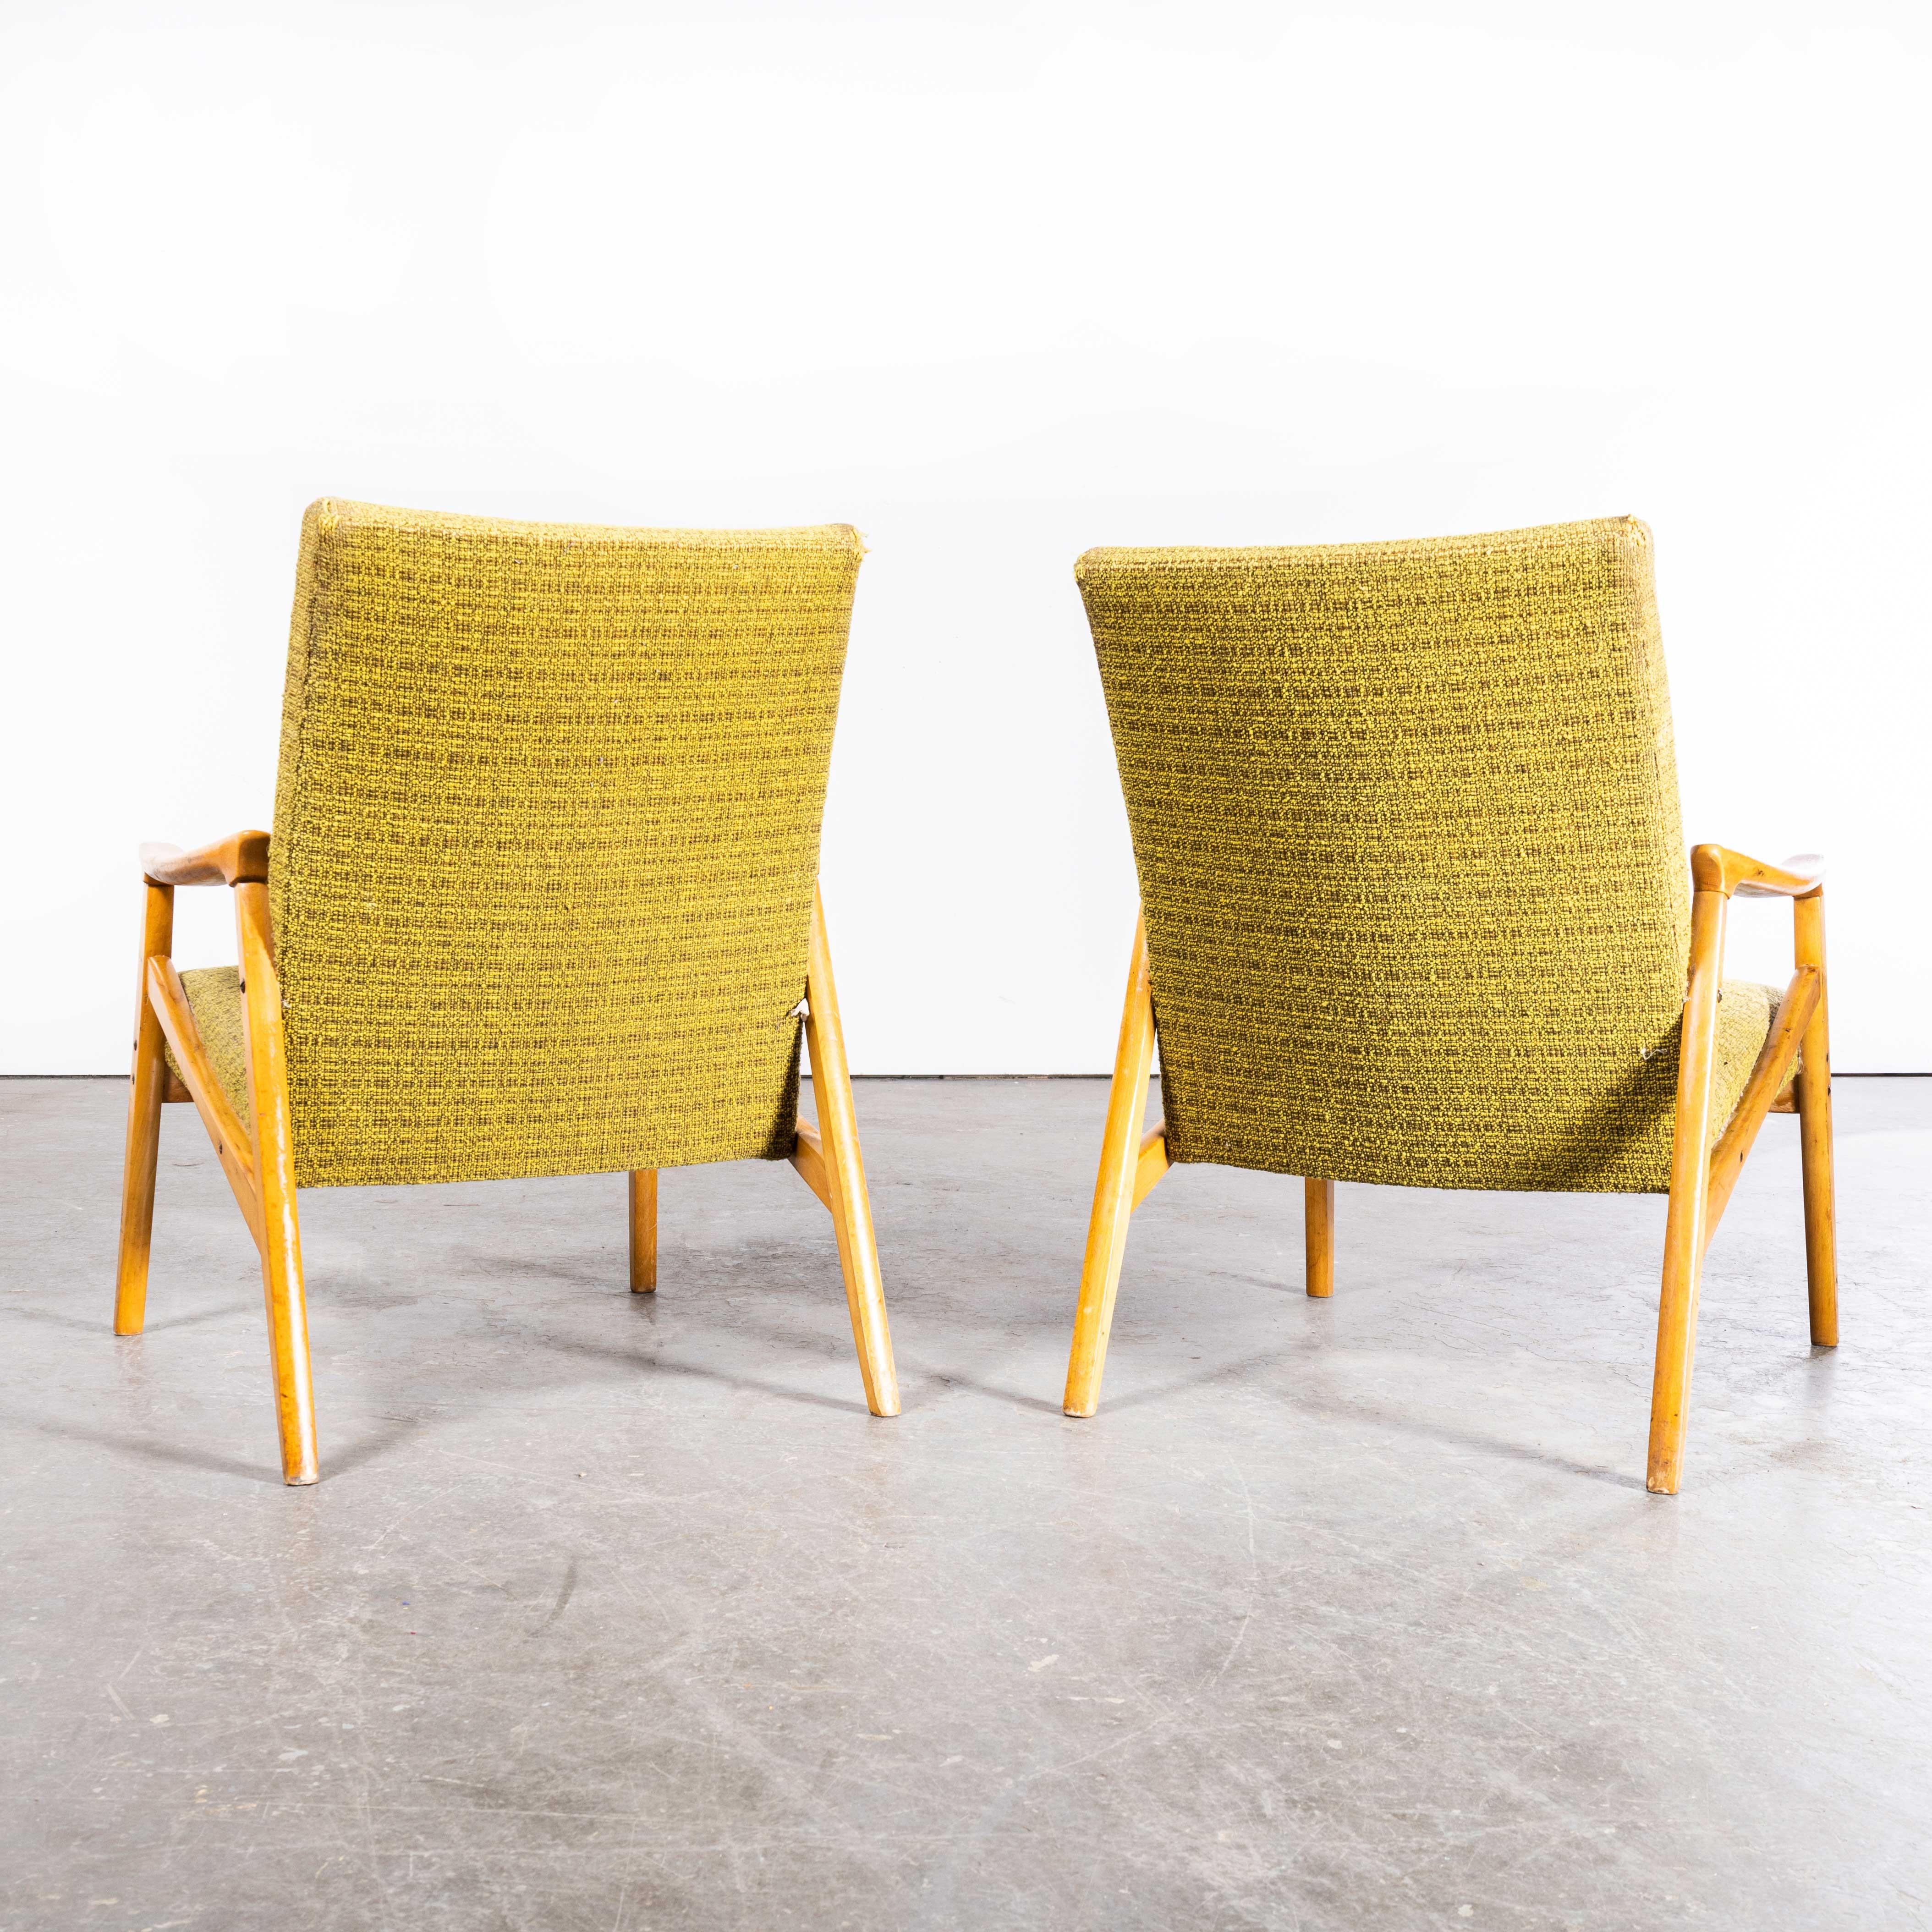 1950s Jaroslav Smidek Original Armchairs – Pair In Lime Green
1950s Jaroslav Smidek Original Armchairs – Pair In Lime Green. Sourced direct in the Czech republic this is one of Smidek’s most elegant designs. We carefully select very original